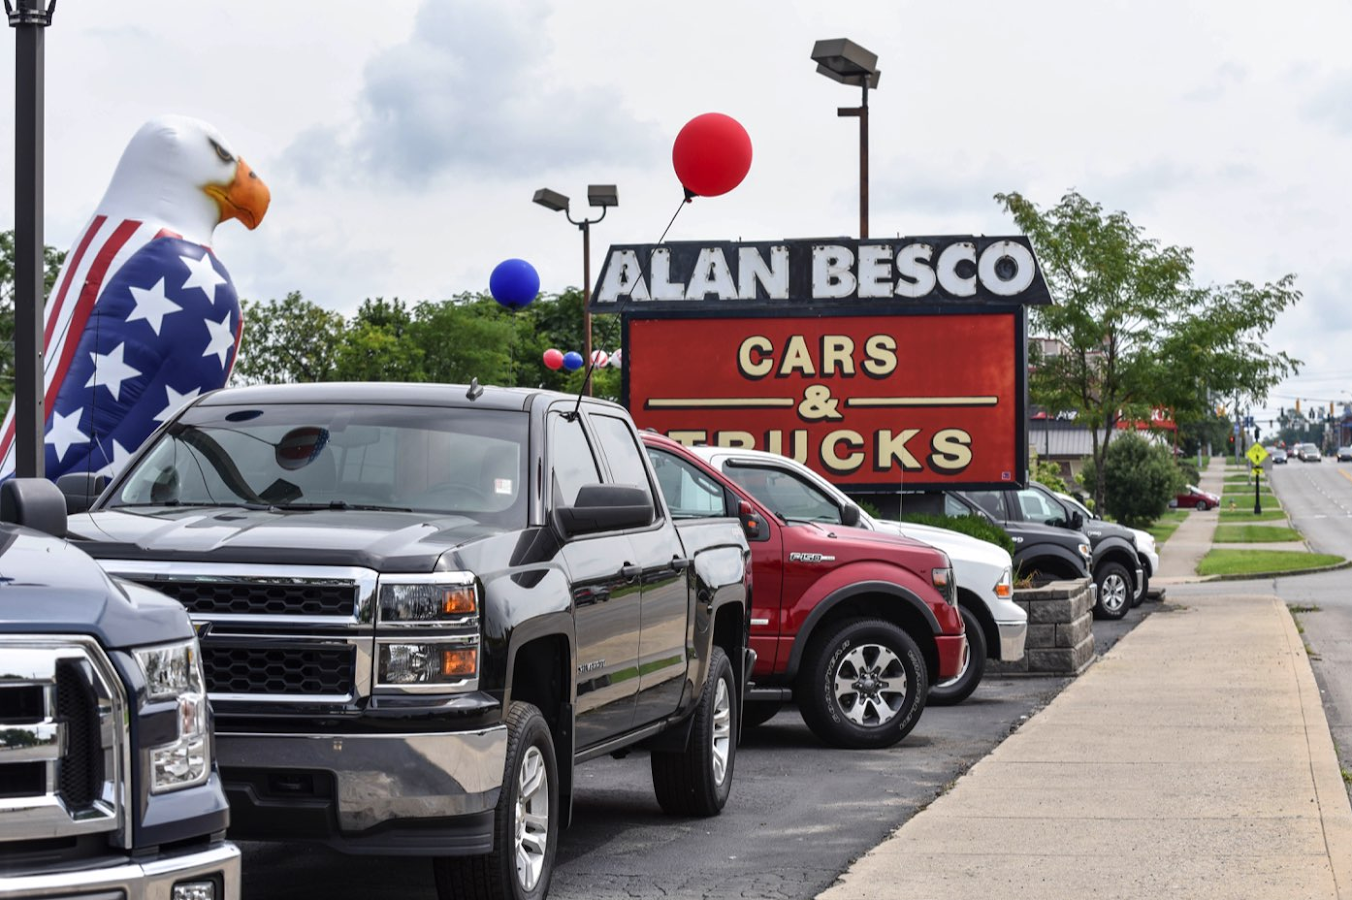 Alan Besco Cars And Trucks Superstore